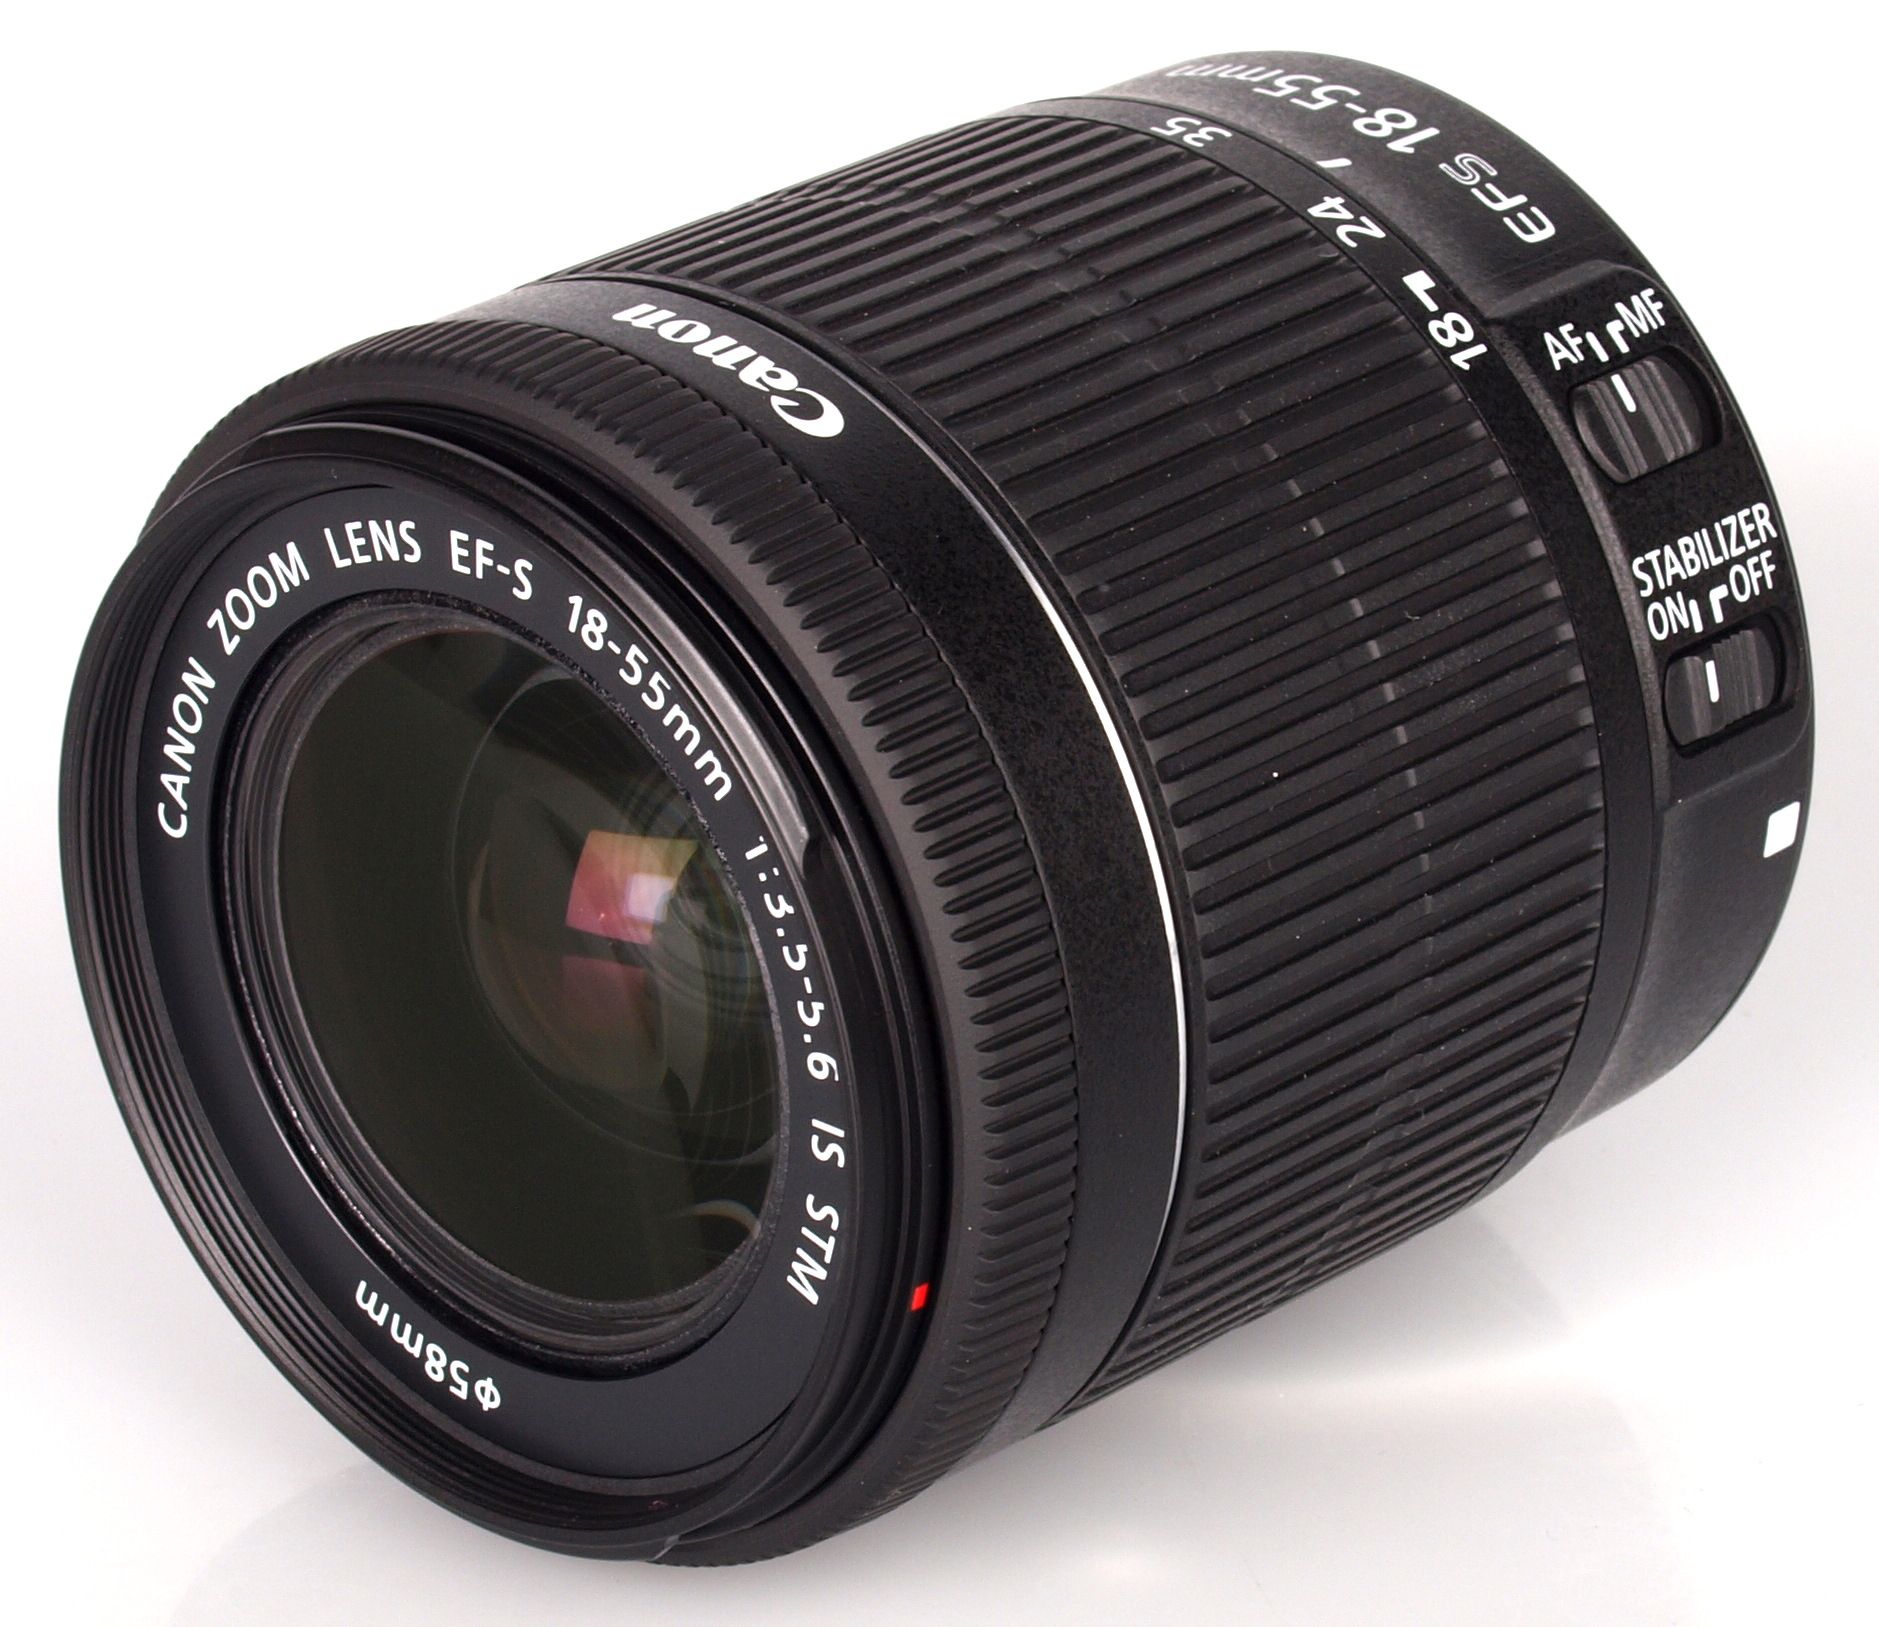 Canon EF-S 18-55mm f/3.5-5.6 IS STM Review